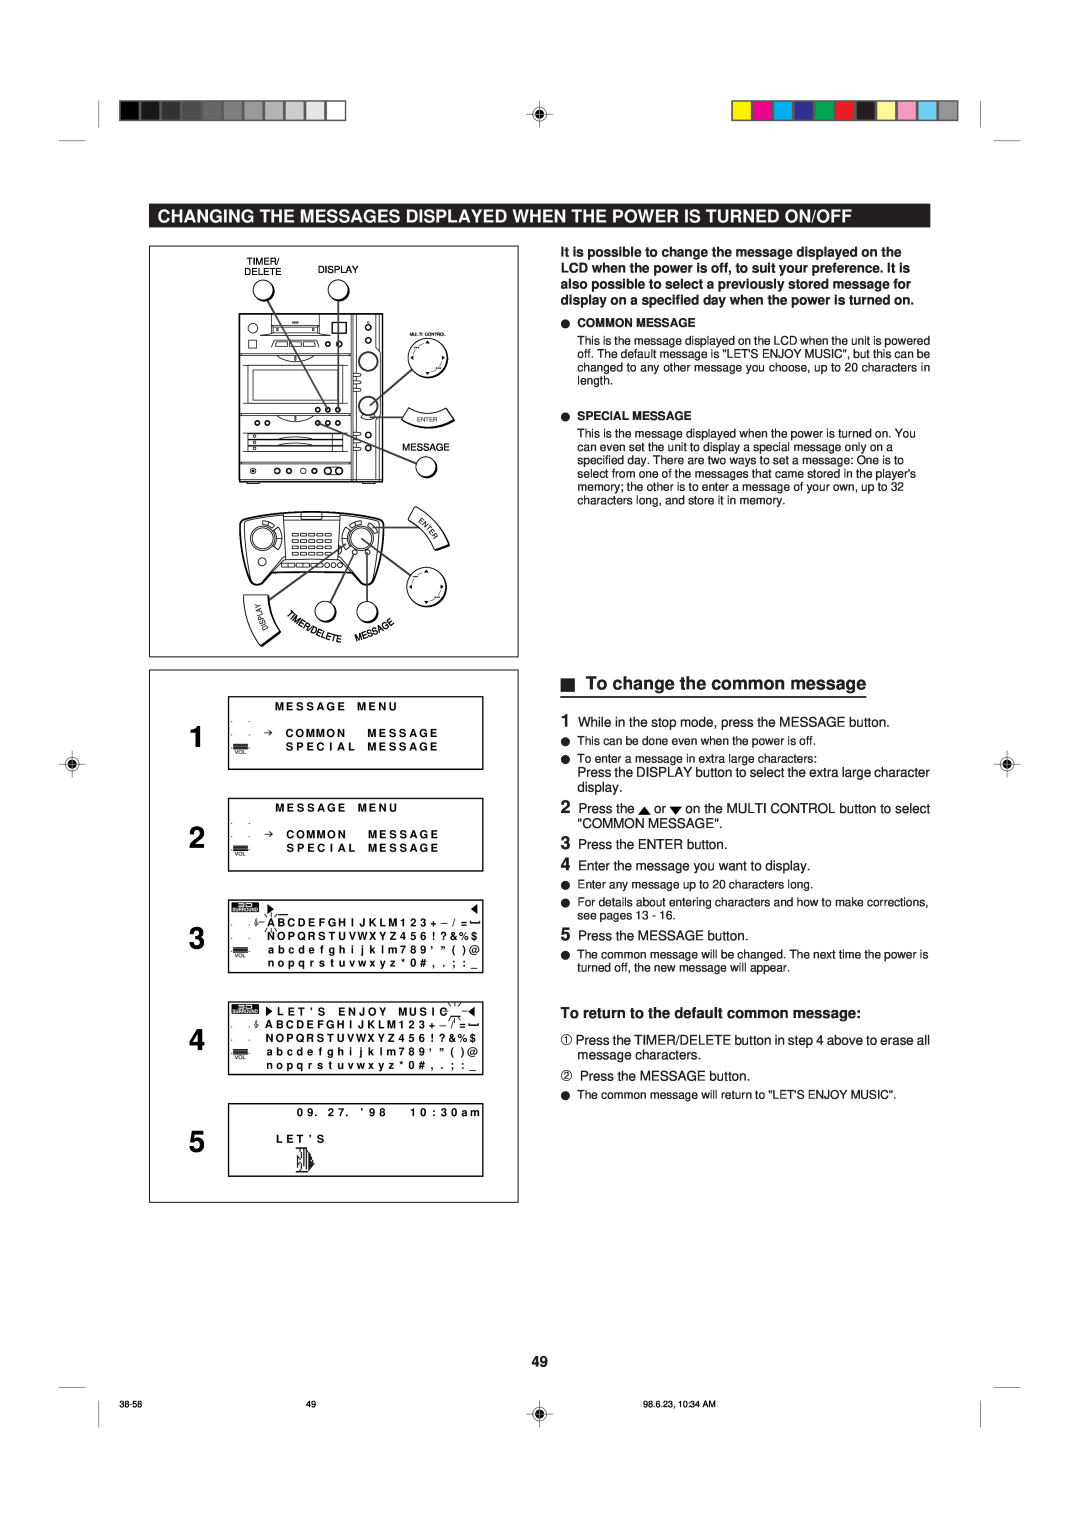 Sharp MD-X8 operation manual HTo change the common message, To return to the default common message 